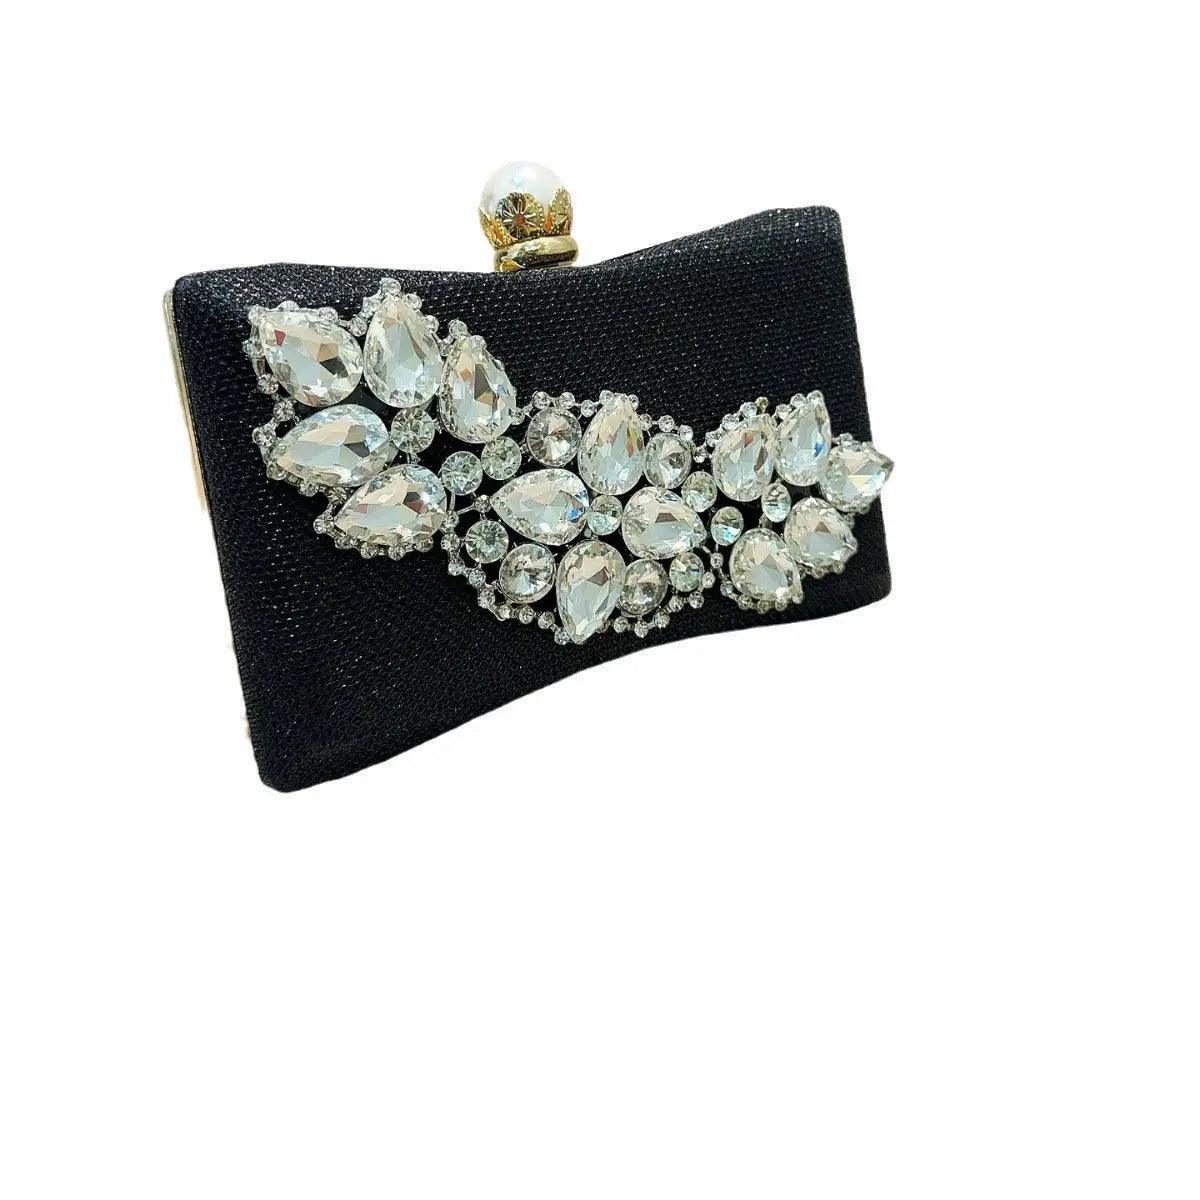 MAC059 Clutches Wedding Dinner Party Sparkling Handbags - Mariam's Collection